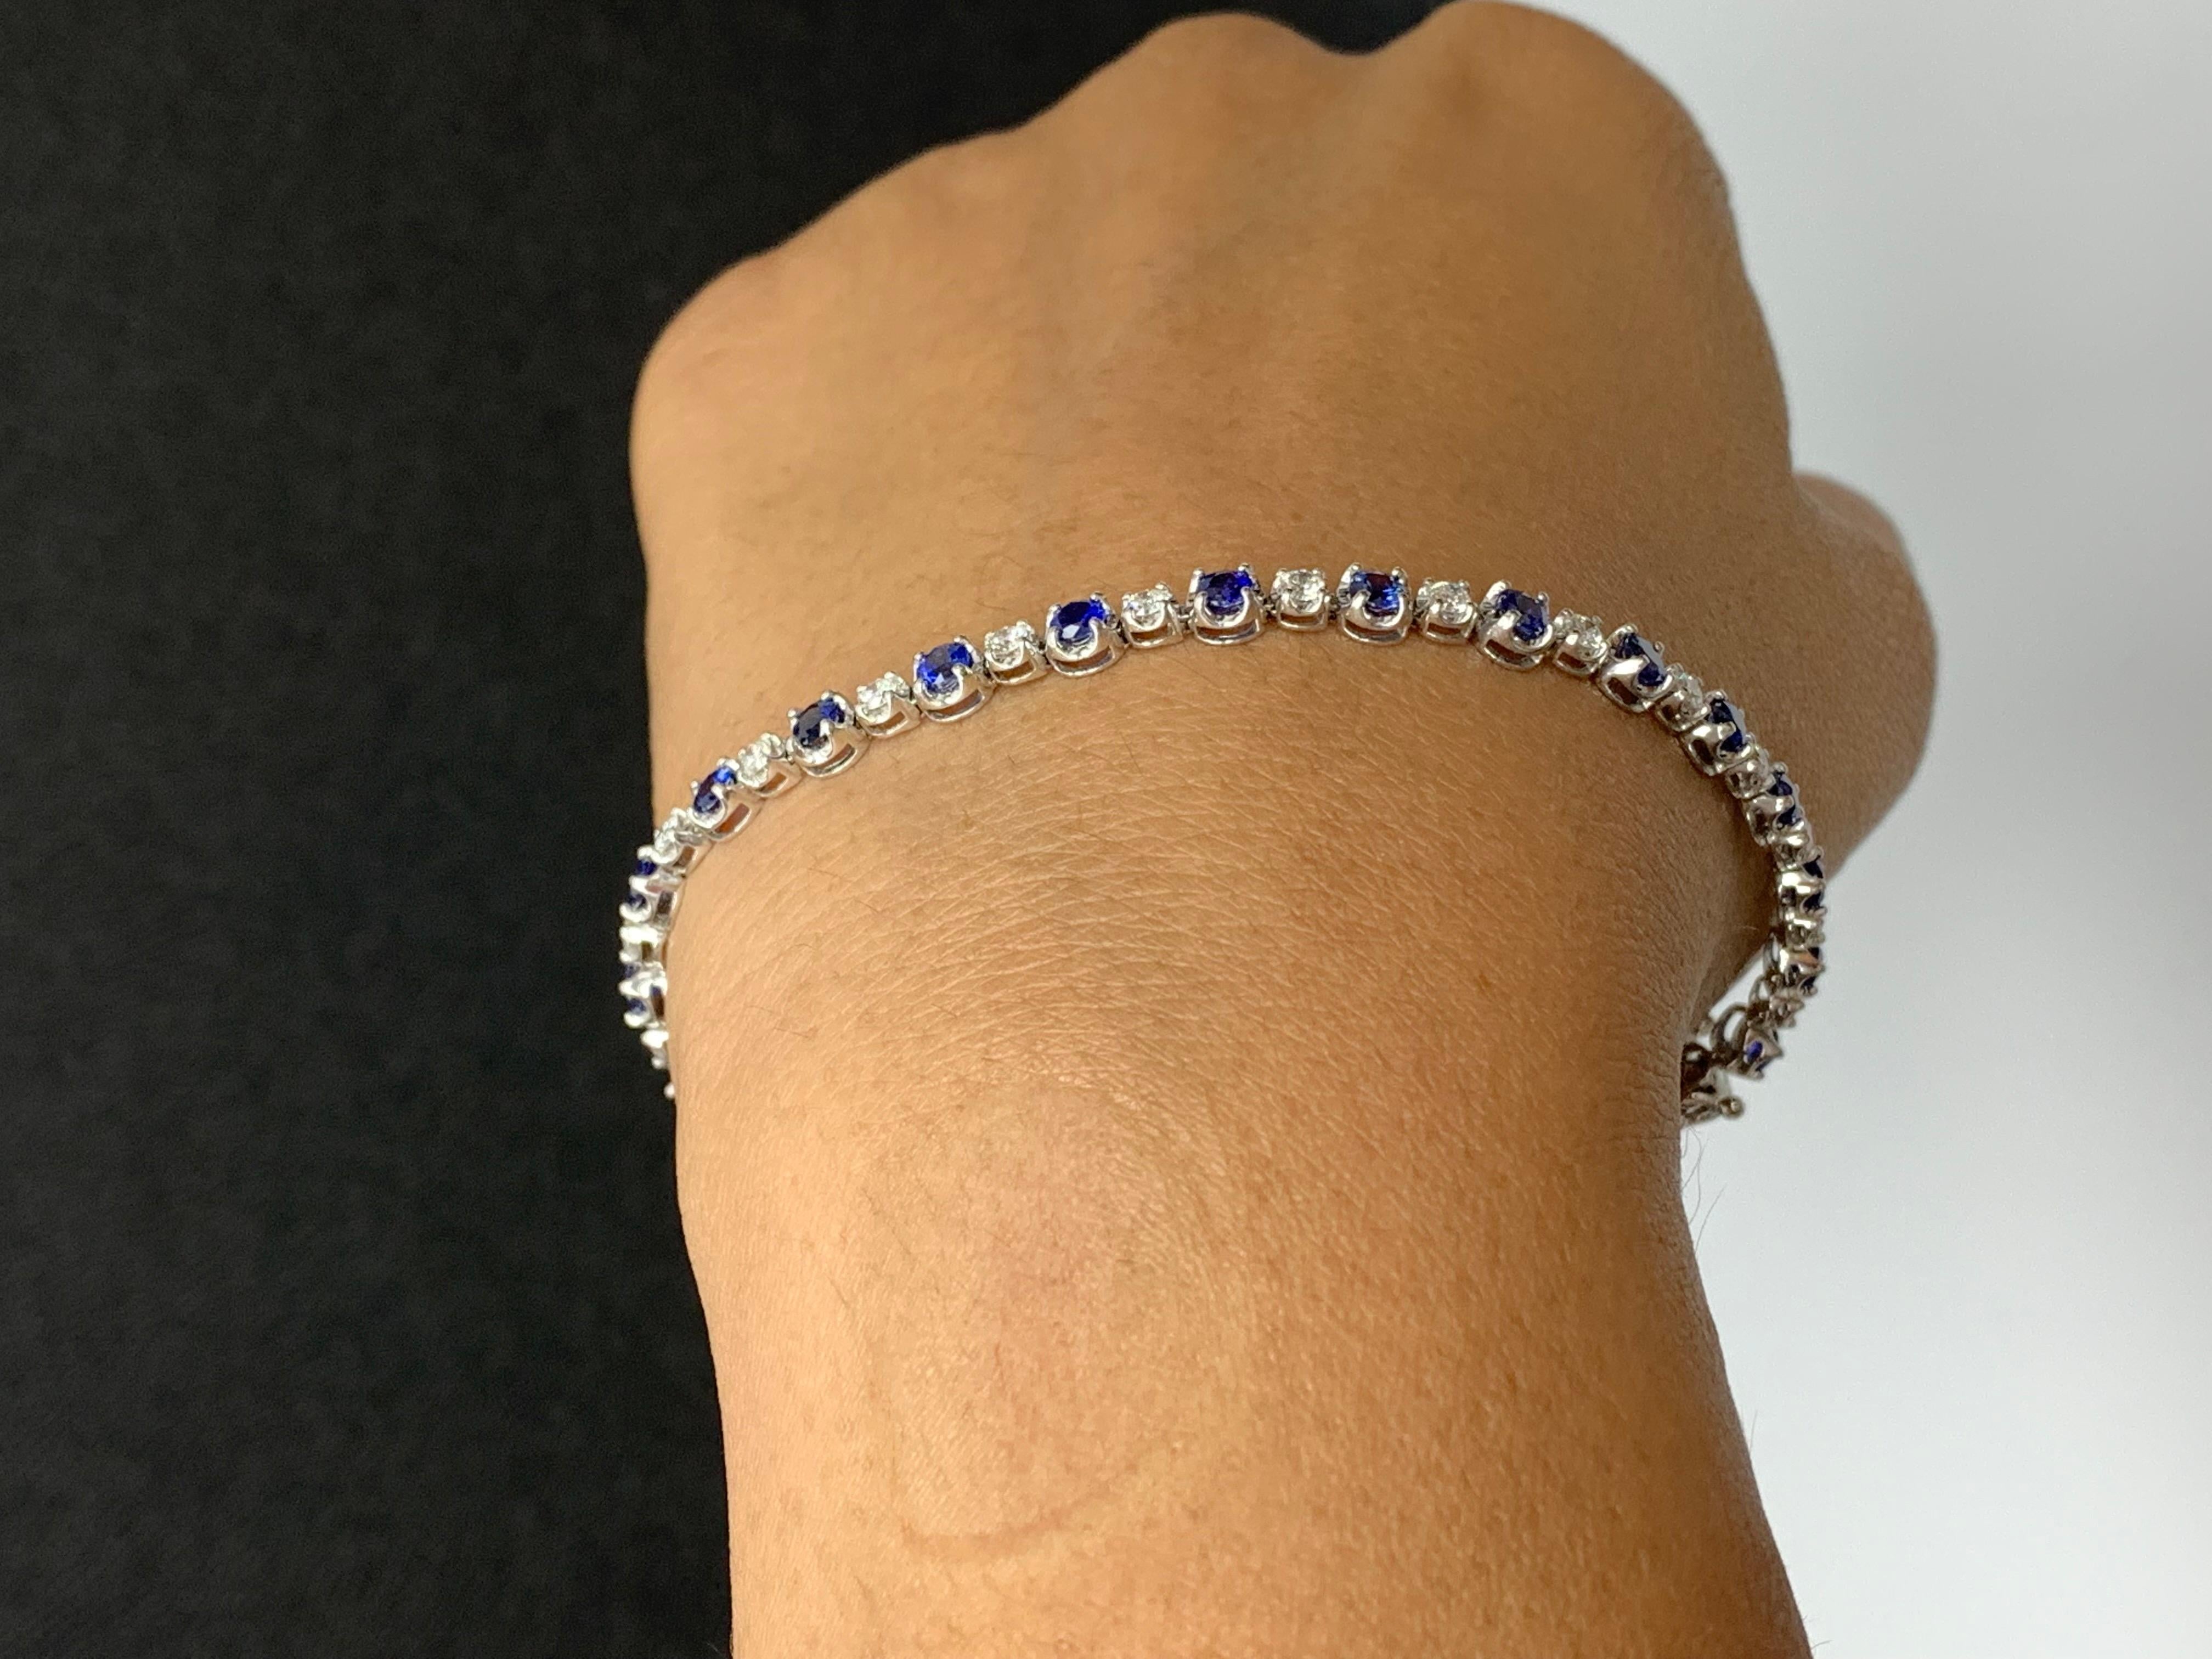 Modern 2.96 Carat Round Blue Sapphire and Diamond Bracelet in 14k White Gold For Sale